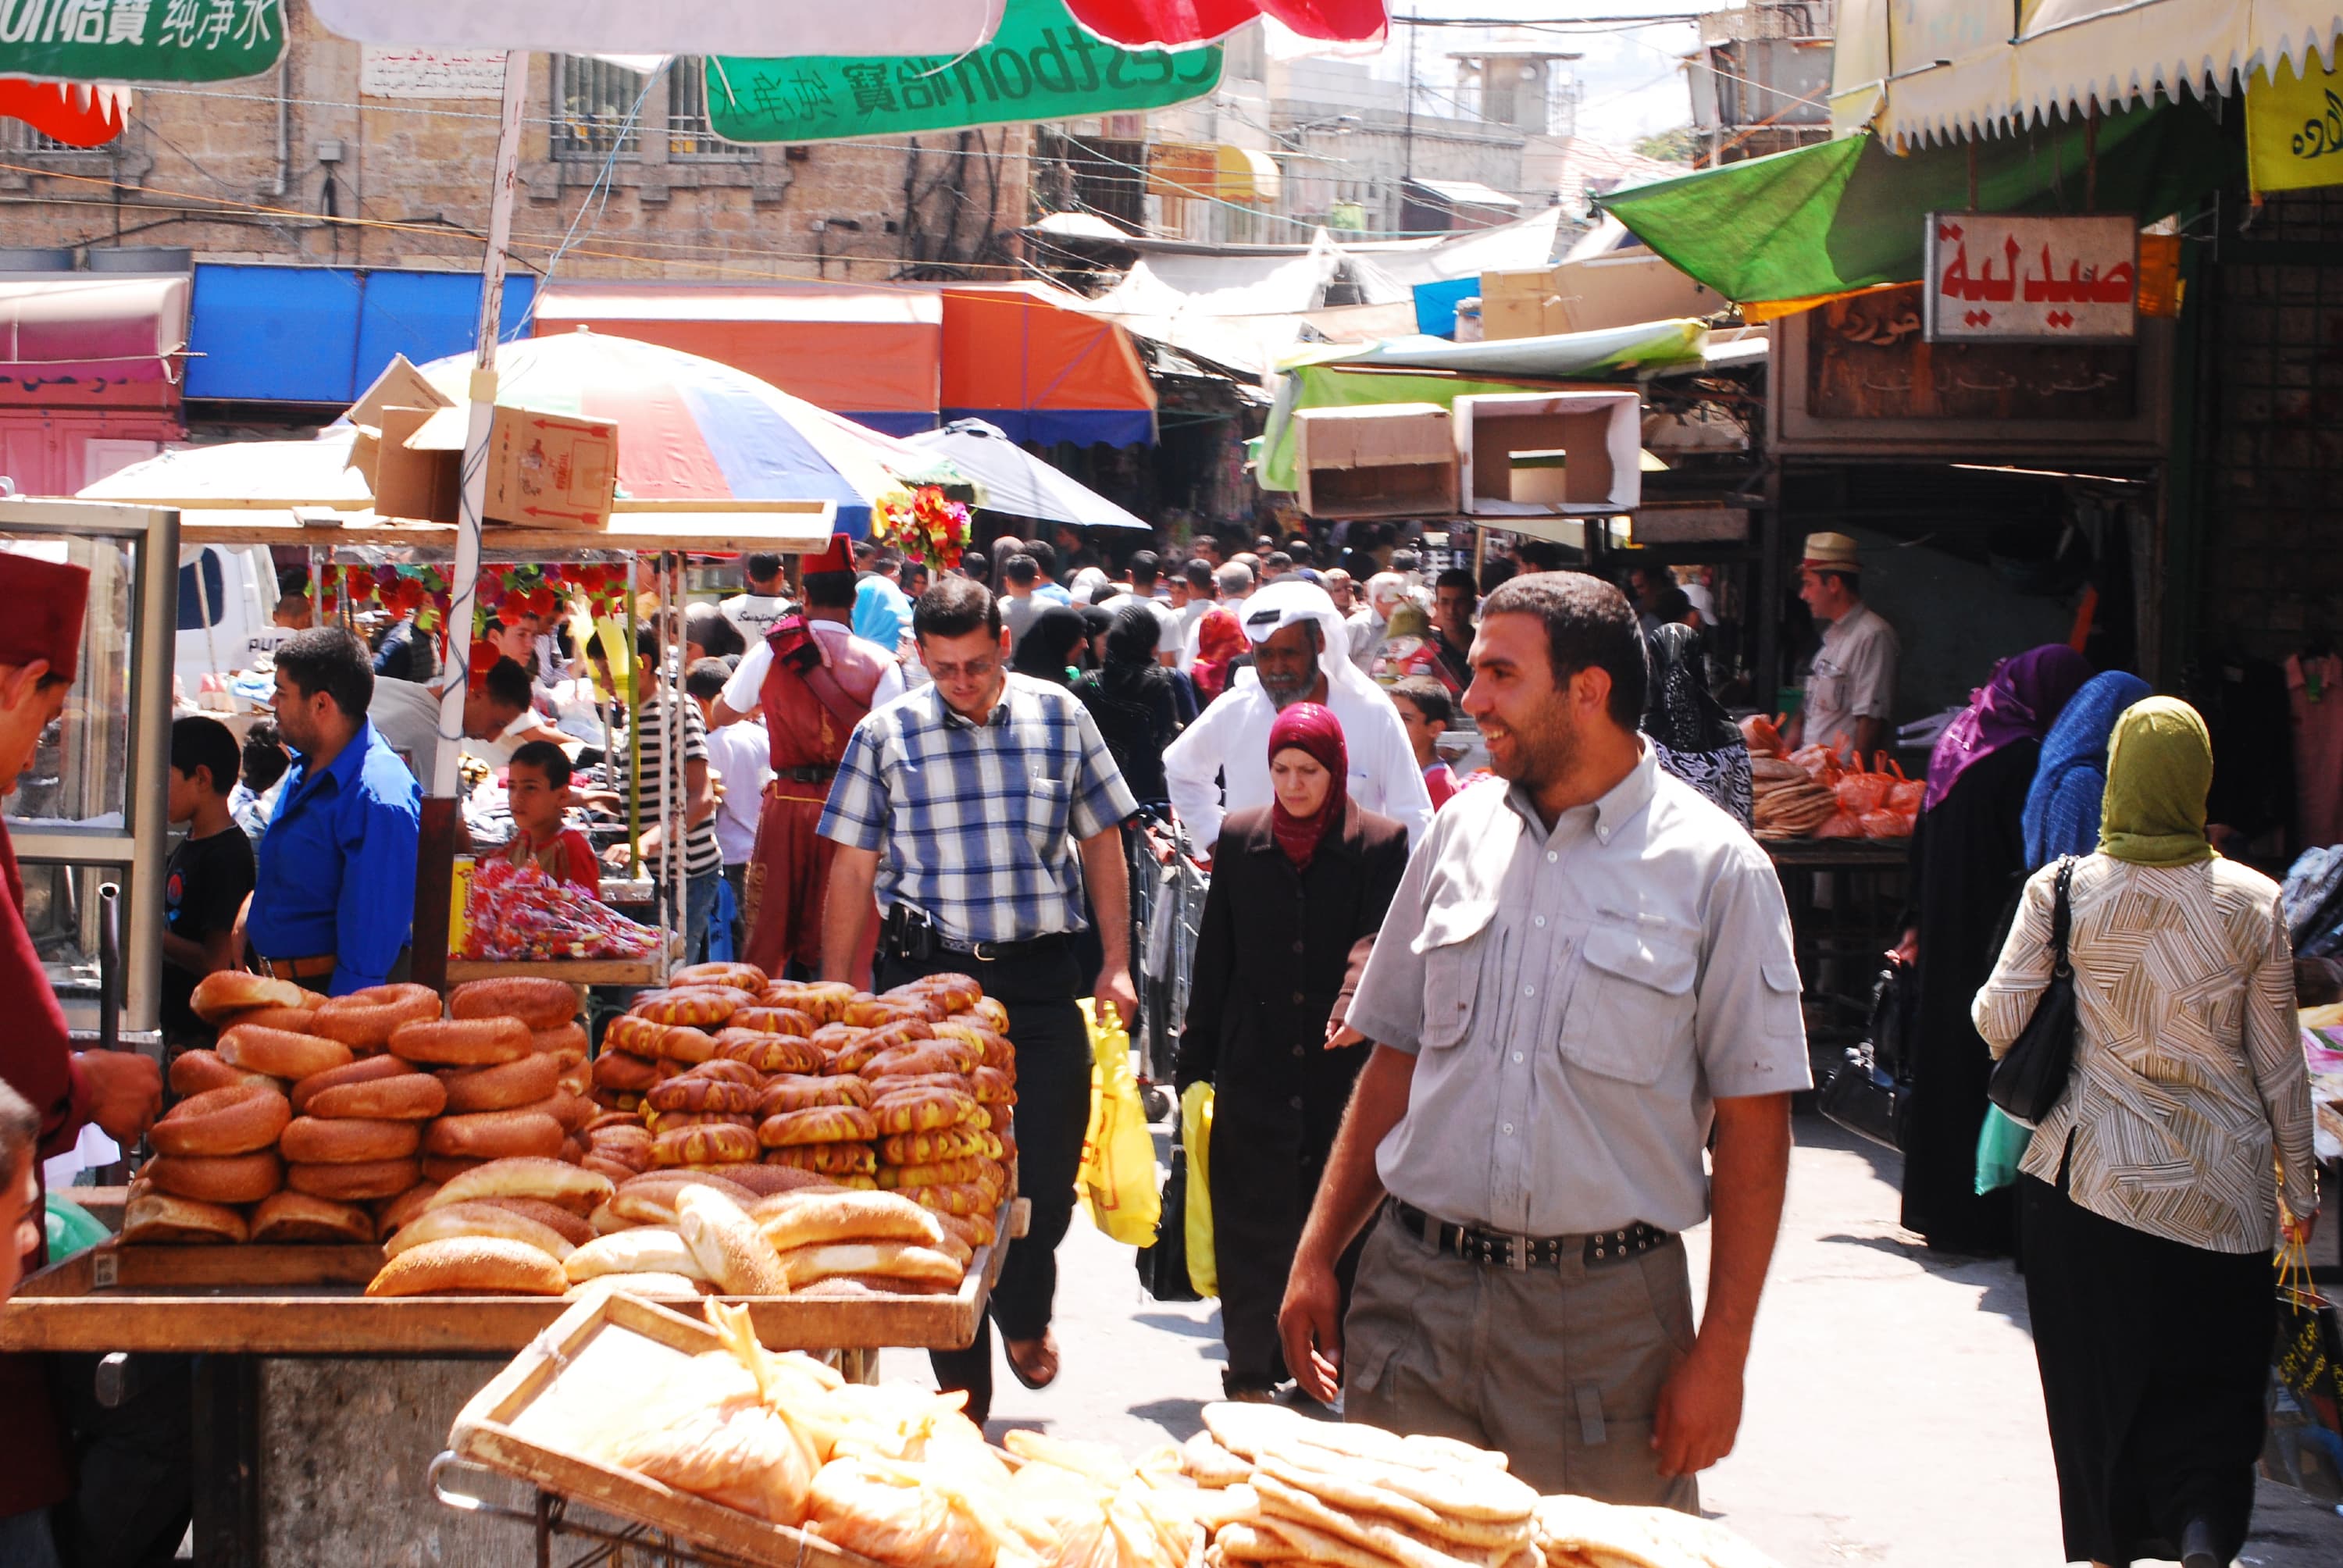 A scene from a souk in the West Bank circa 2008. (Courtesy)